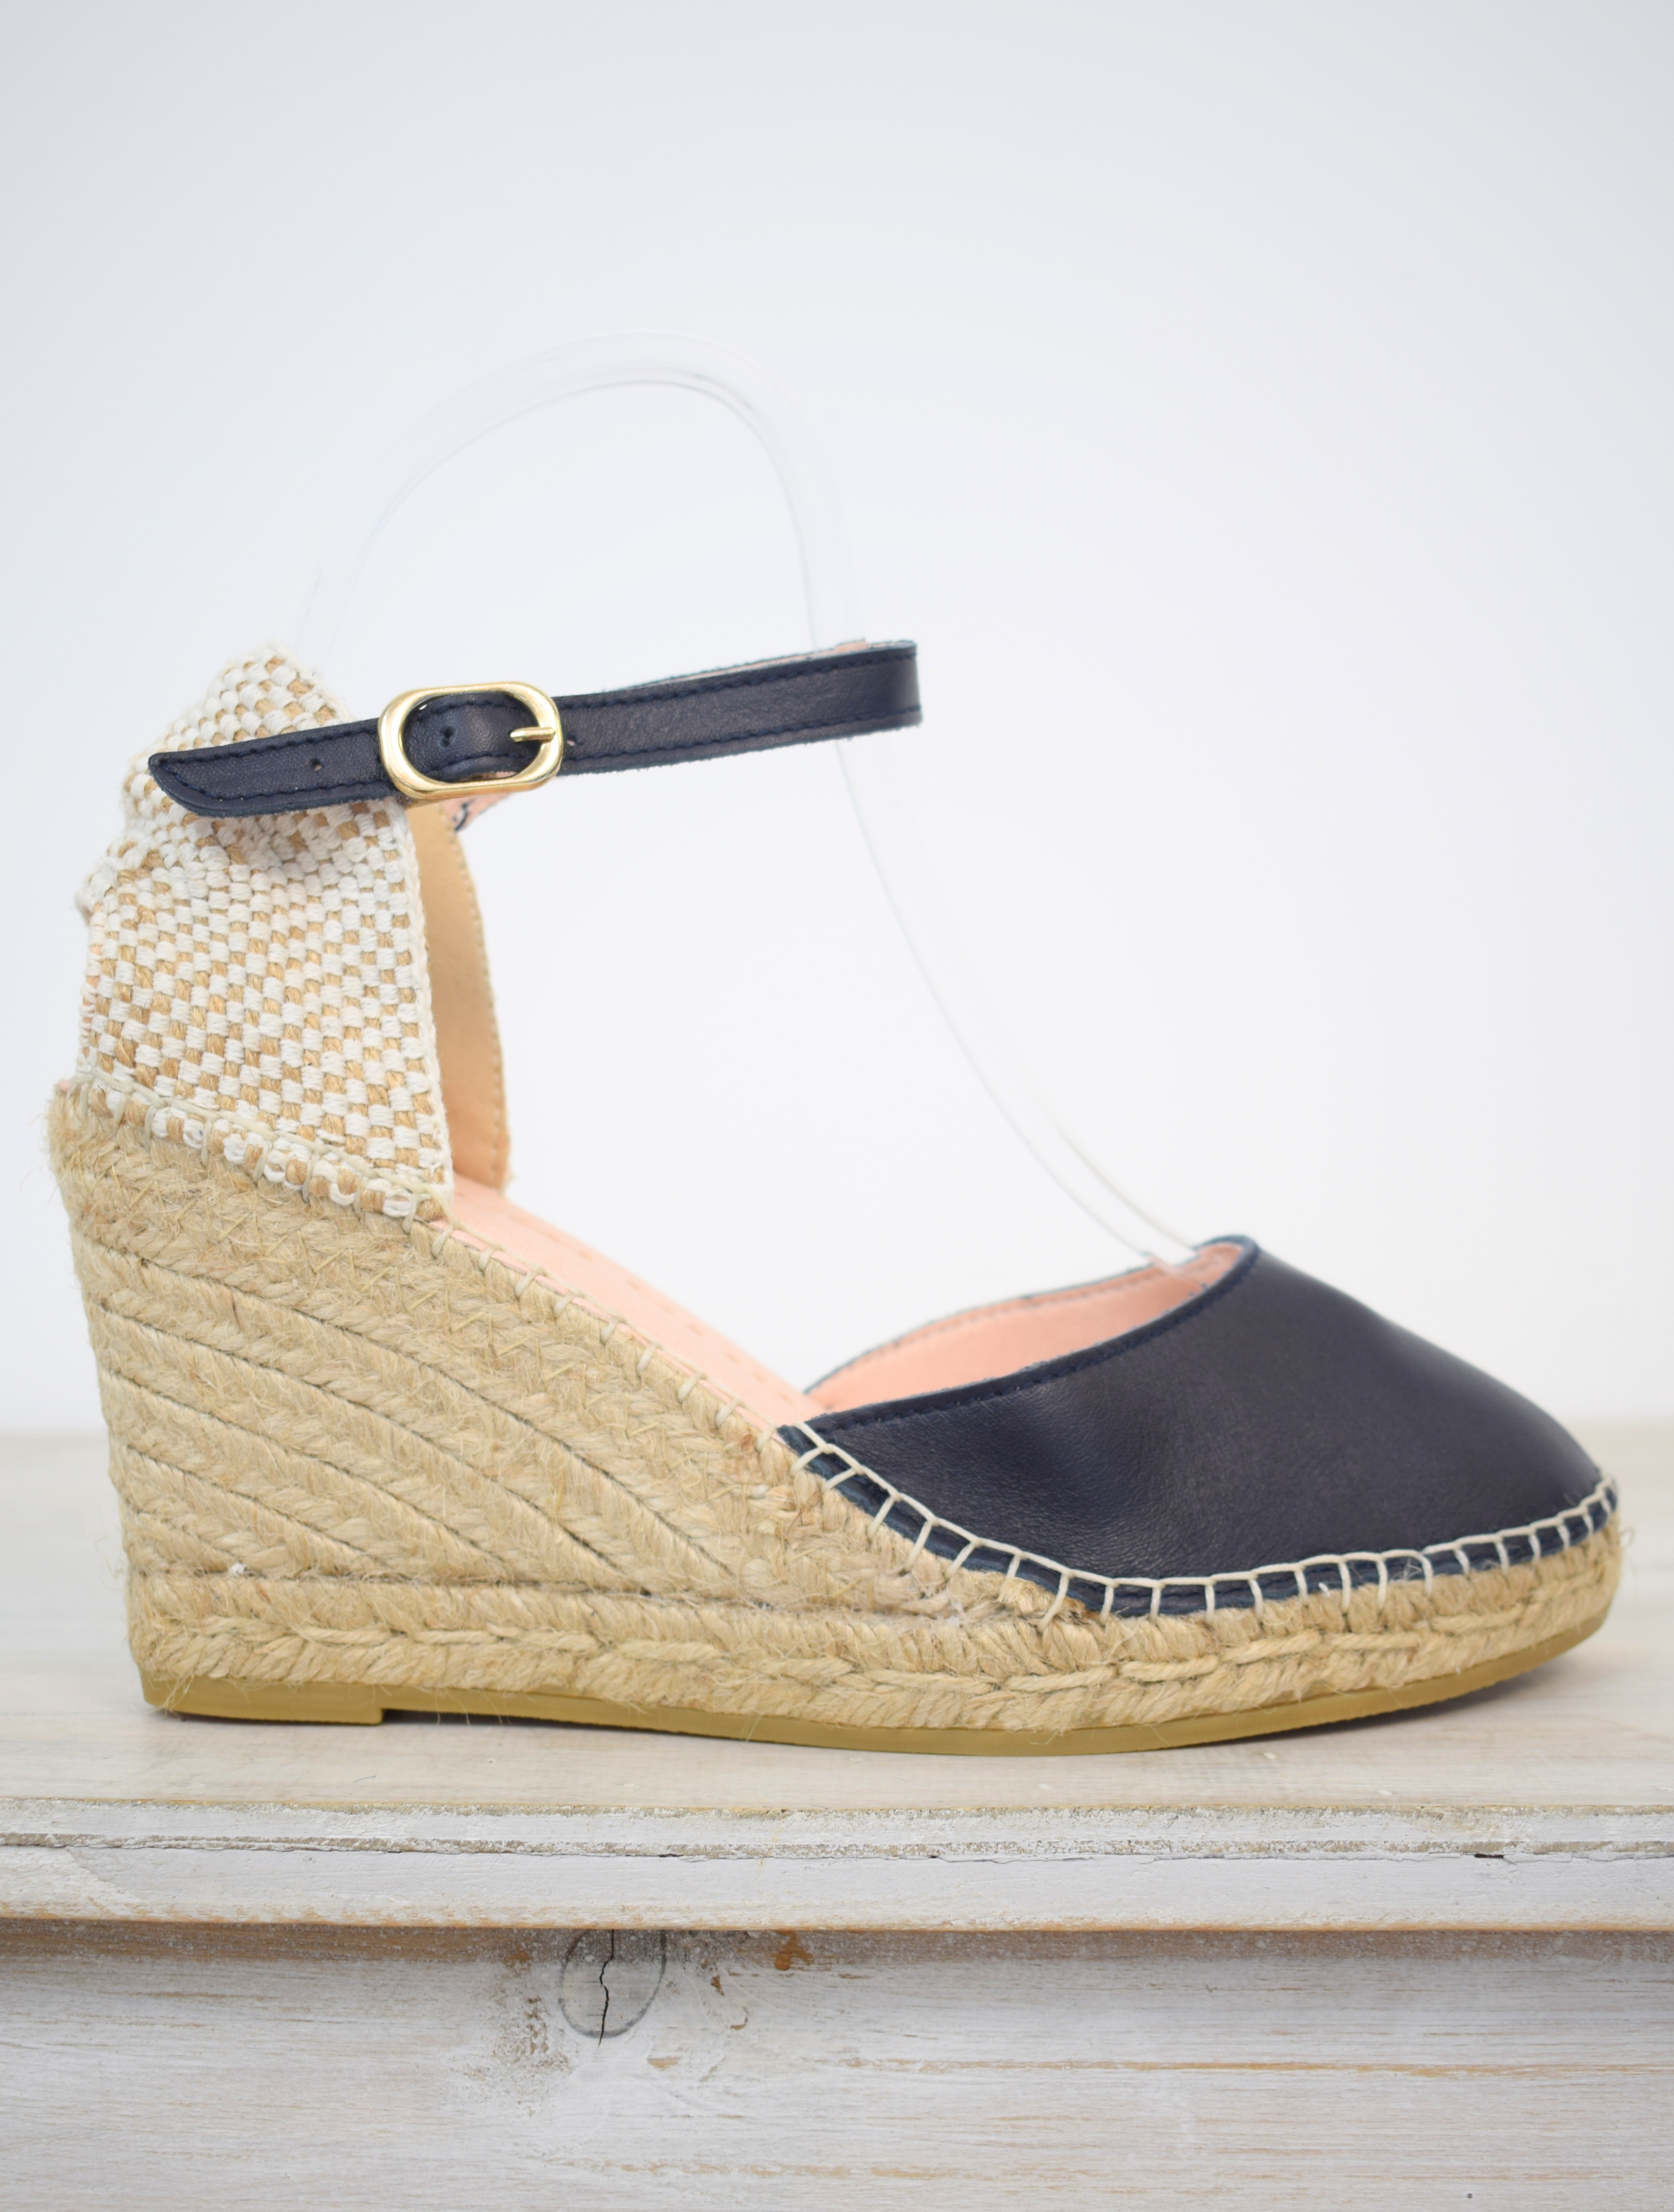 Closed toe navy espadrille with leather upper and strap